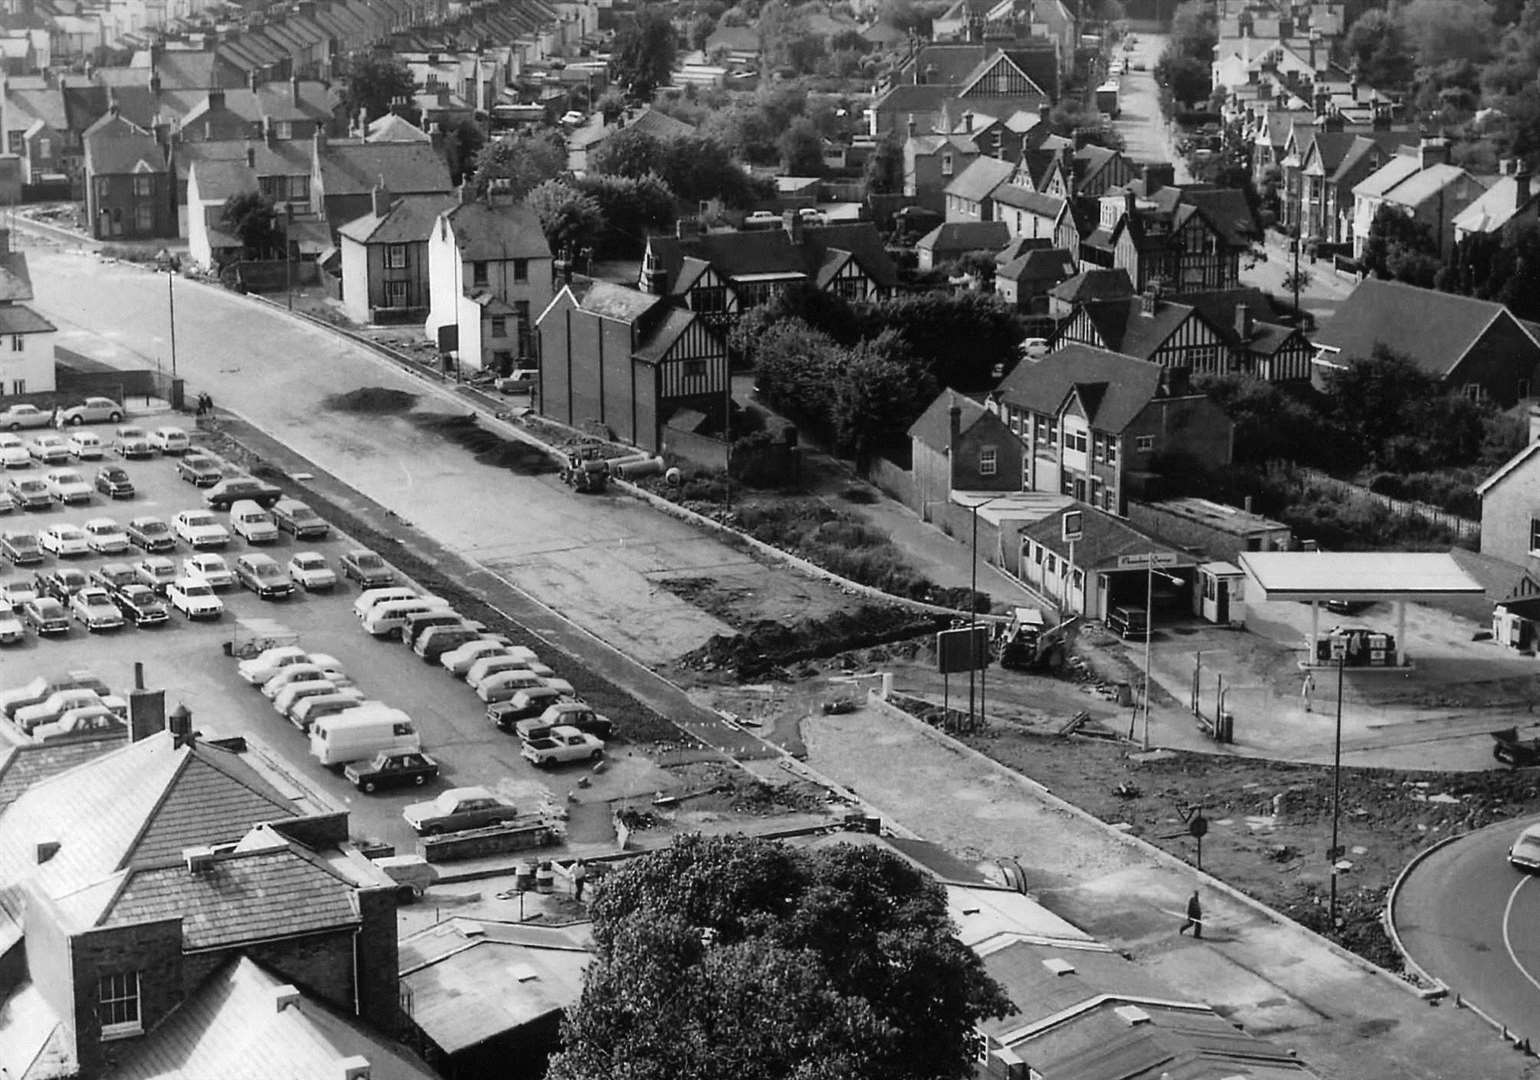 Ashford's ring-road sweeps towards Somerset Road in this 1974 view which shows the former Chambers Garage on the right